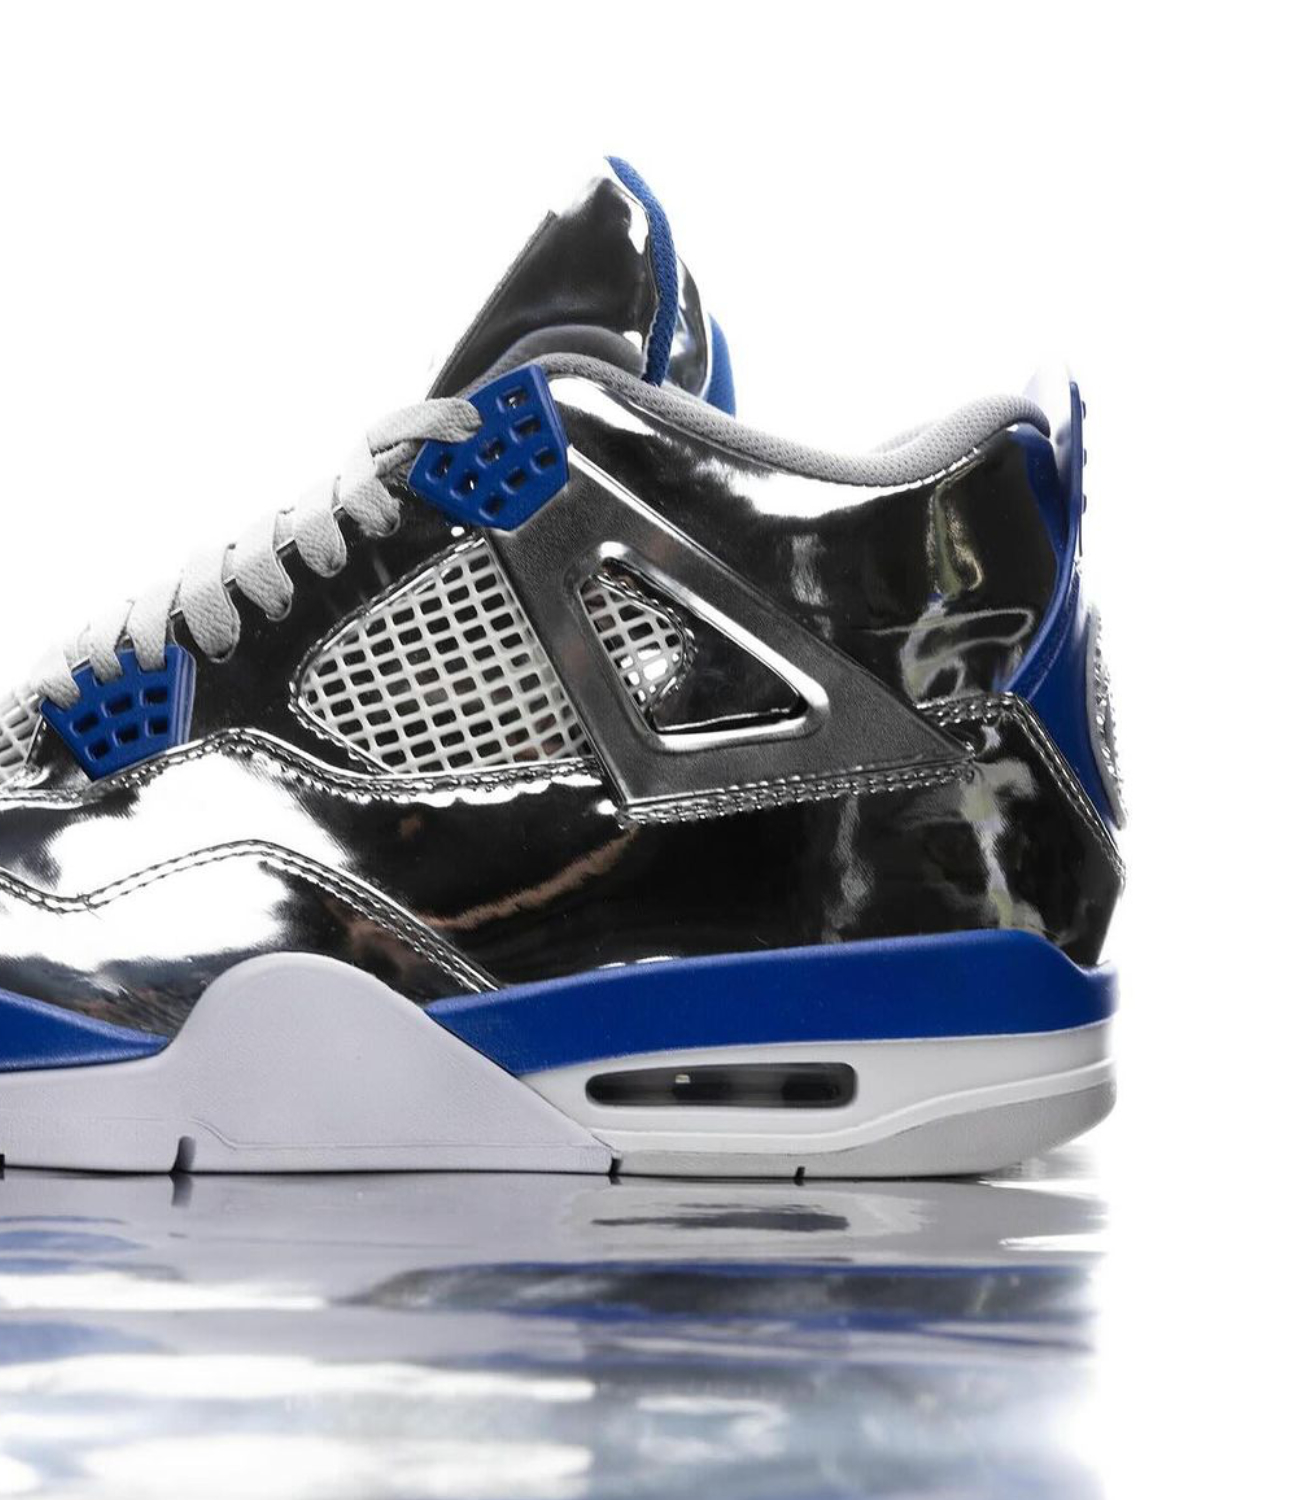 Usher's Super Bowl Jordan 4s were designed by Usher's Super Bowl halftime show had everything, including a pair of custom Jordan 4 sneakers designed by renowned customizer The Shoe Surgeon.